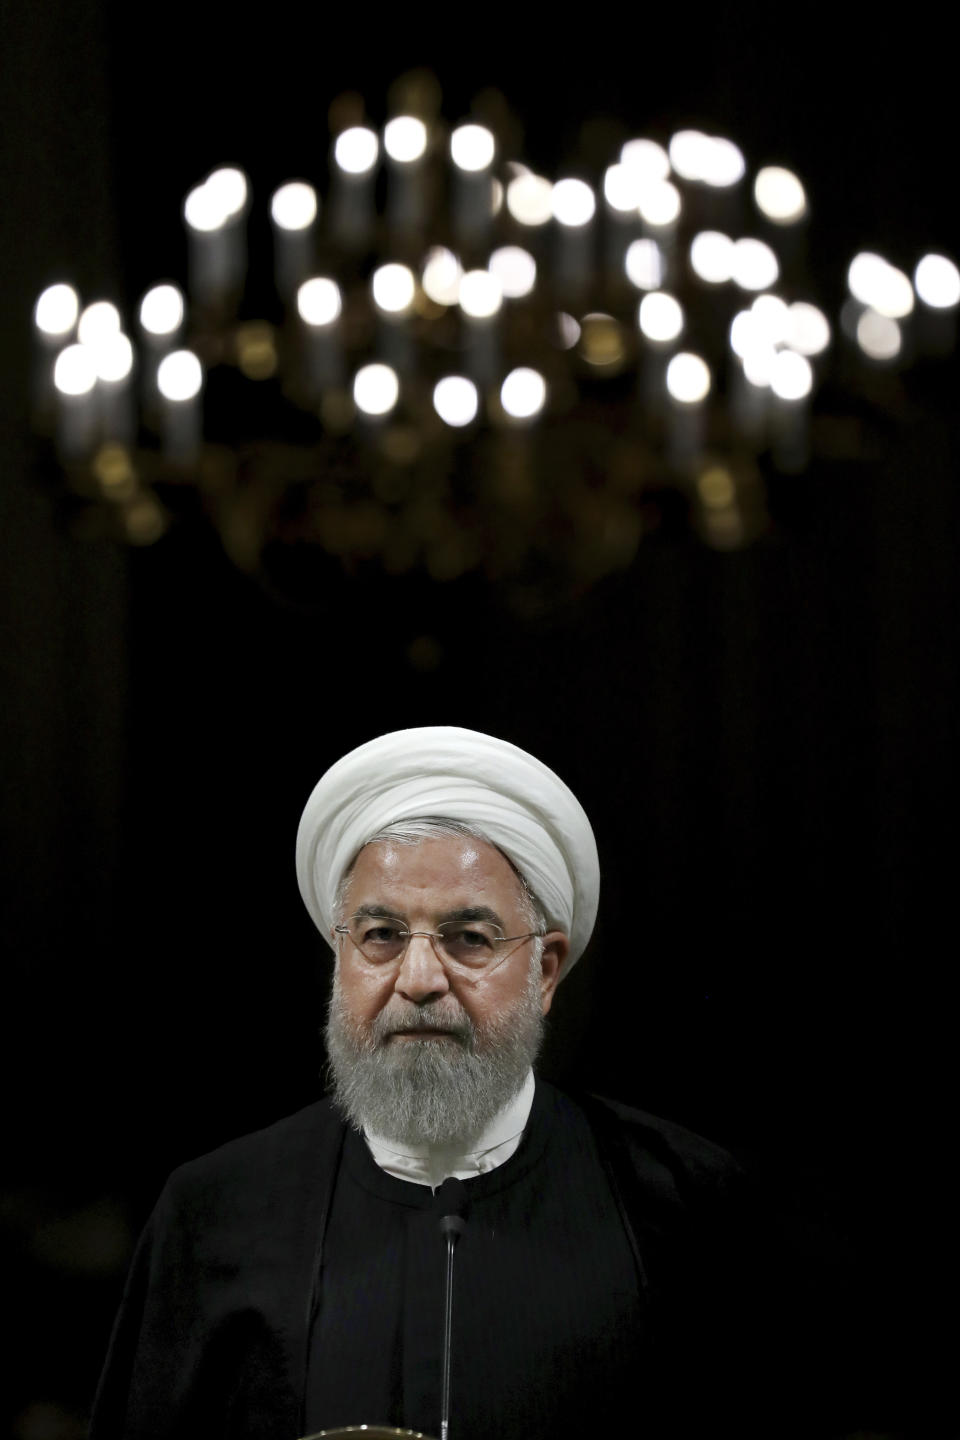 Iranian President Hassan Rouhani listens during a joint press conference with Japanese Prime Minister Shinzo Abe, after their meeting at the Saadabad Palace in Tehran, Iran, Wednesday, June 12, 2019. The Japanese leader is in Tehran on an mission to calm tensions between the U.S. and Iran. (AP Photo/Ebrahim Noroozi)